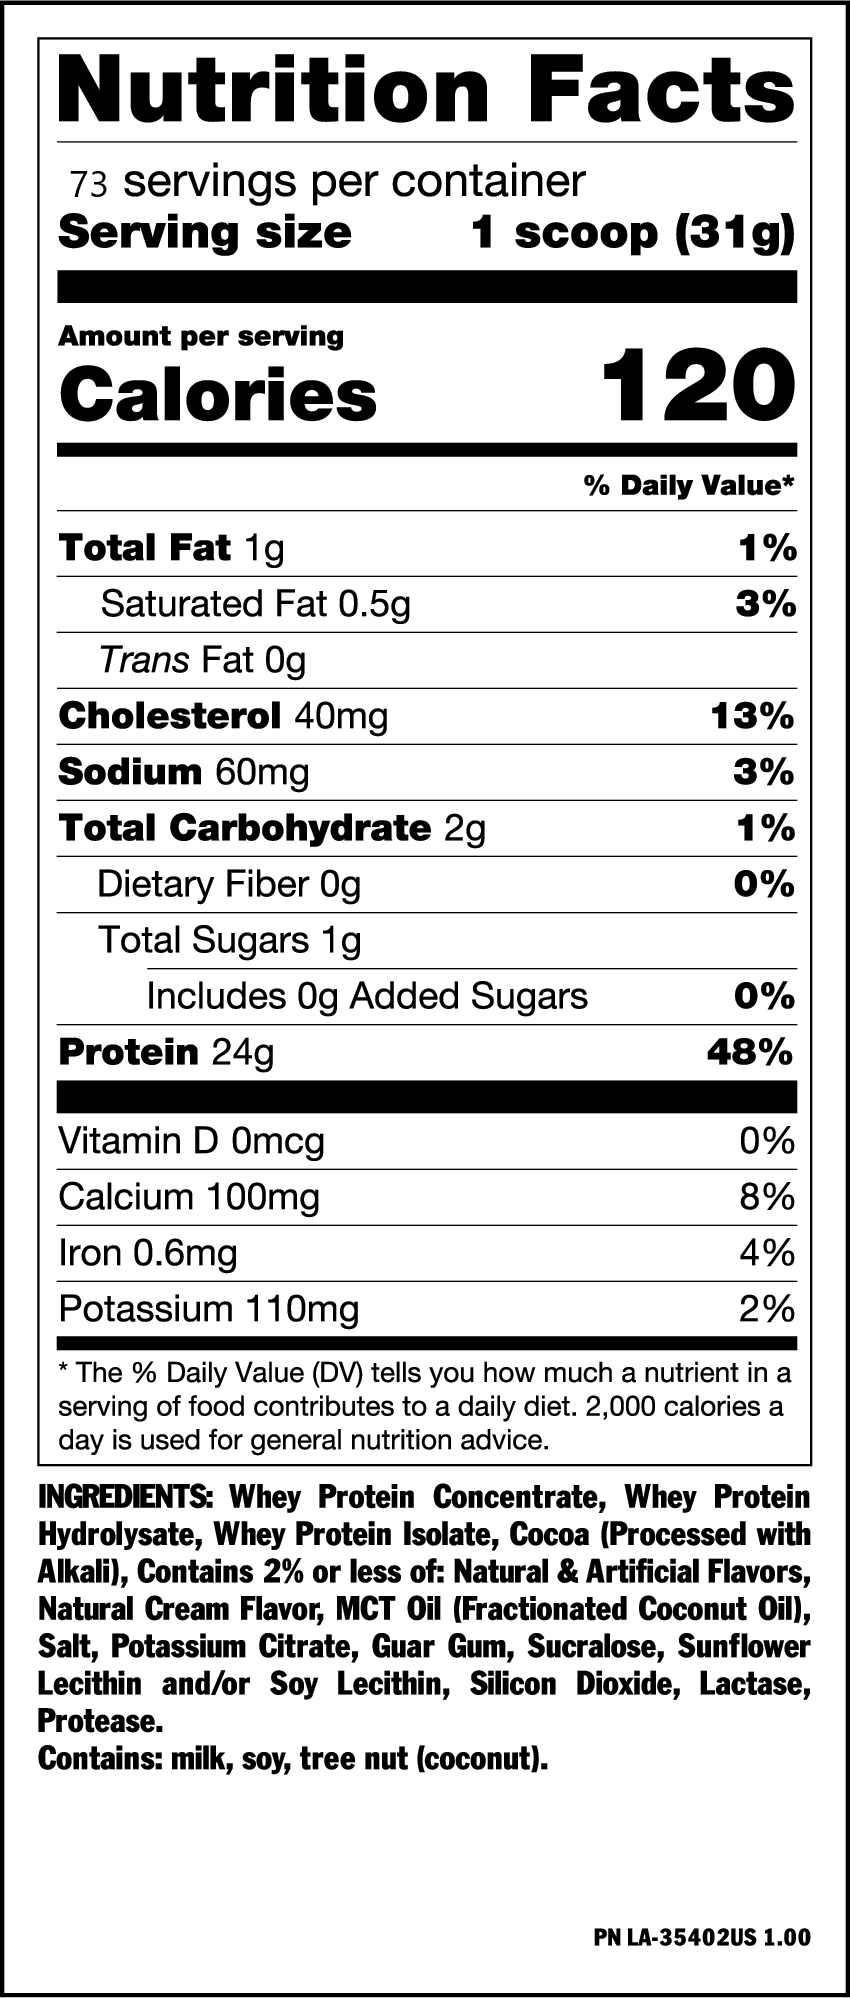 Nutrition label for a whey protein supplement. Each serving (1 scoop, 31g) contains 24g protein, 1g fat, 2g carbs, and key minerals.